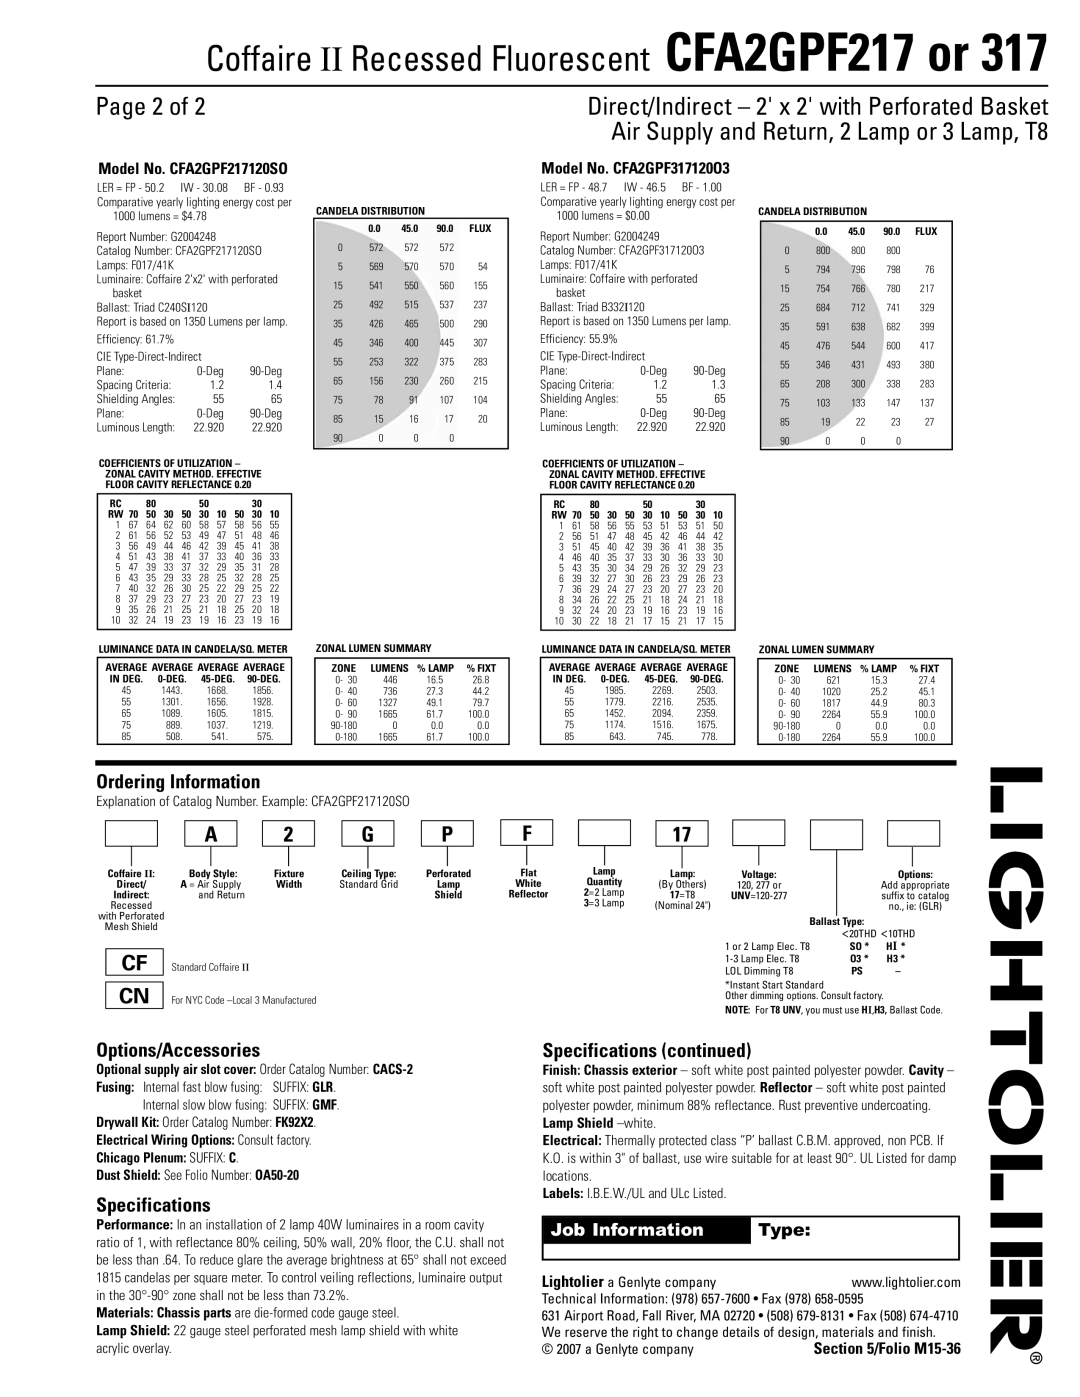 Lightolier CFA2GPF217 or 317 Page 2 of, Ordering Information, Options/Accessories, Specifications continued, Type 